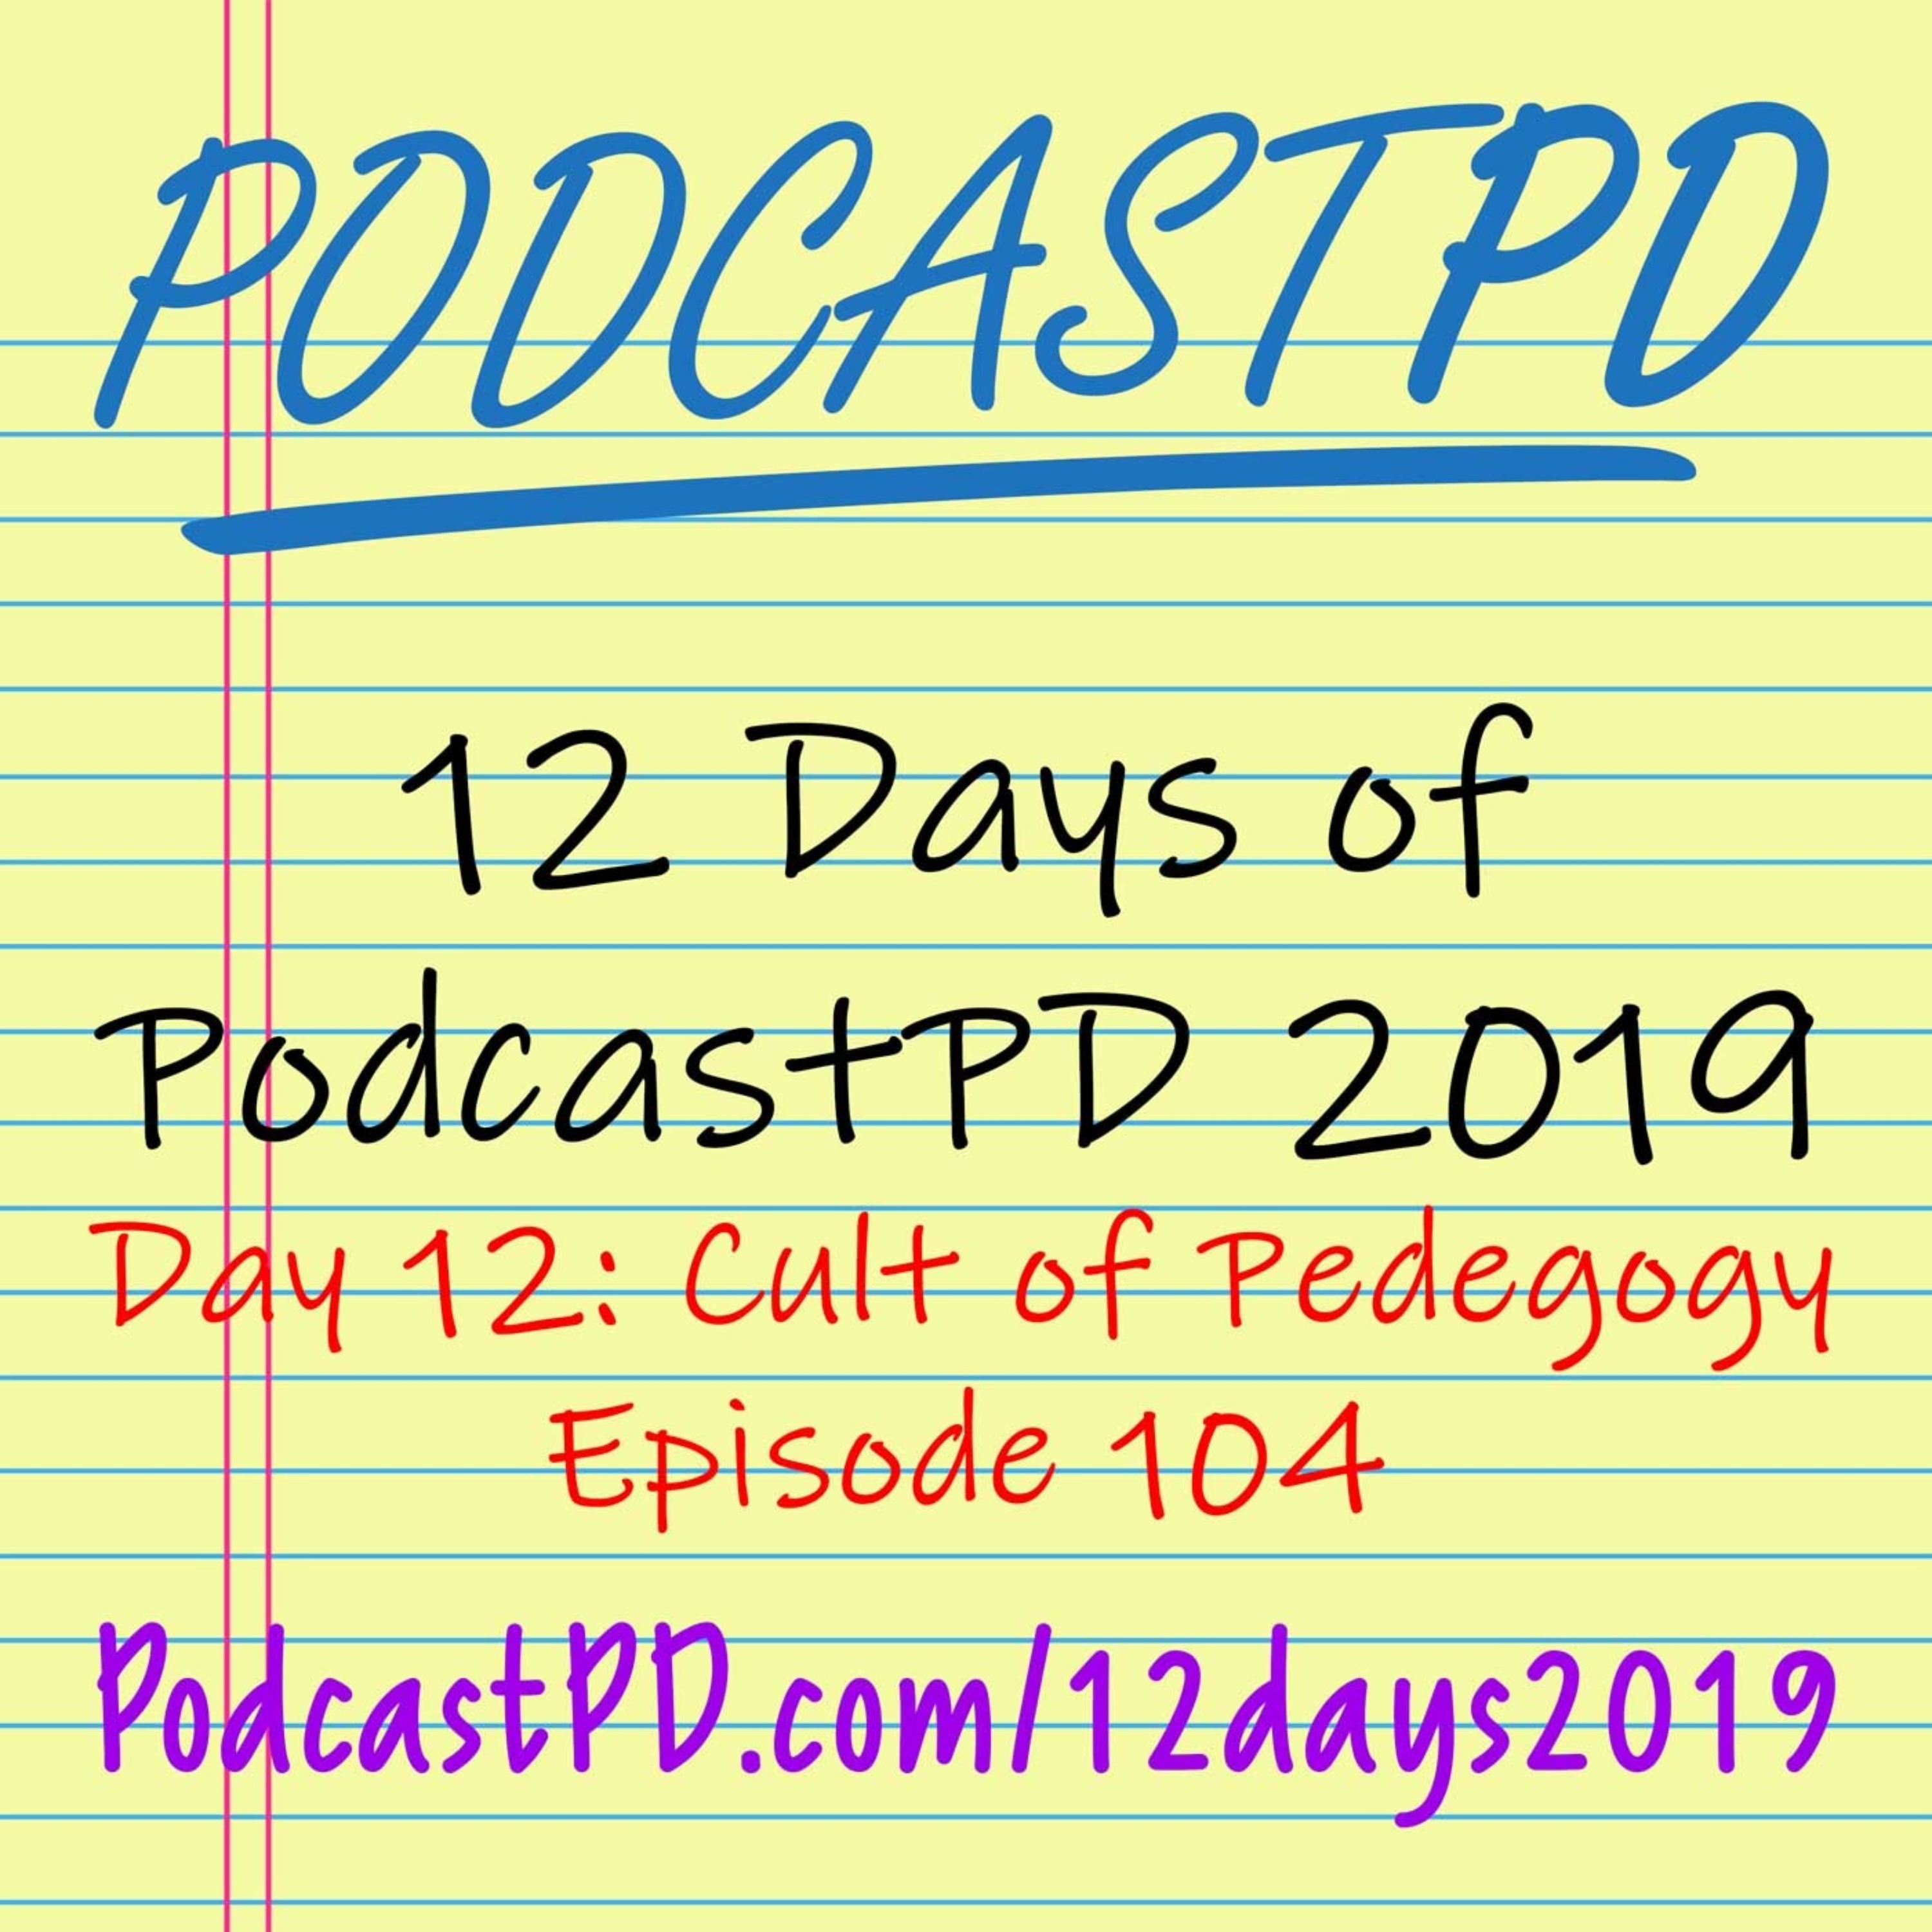 Cult of Pedagogy - 12 Days of PodcastPD 2019 Image